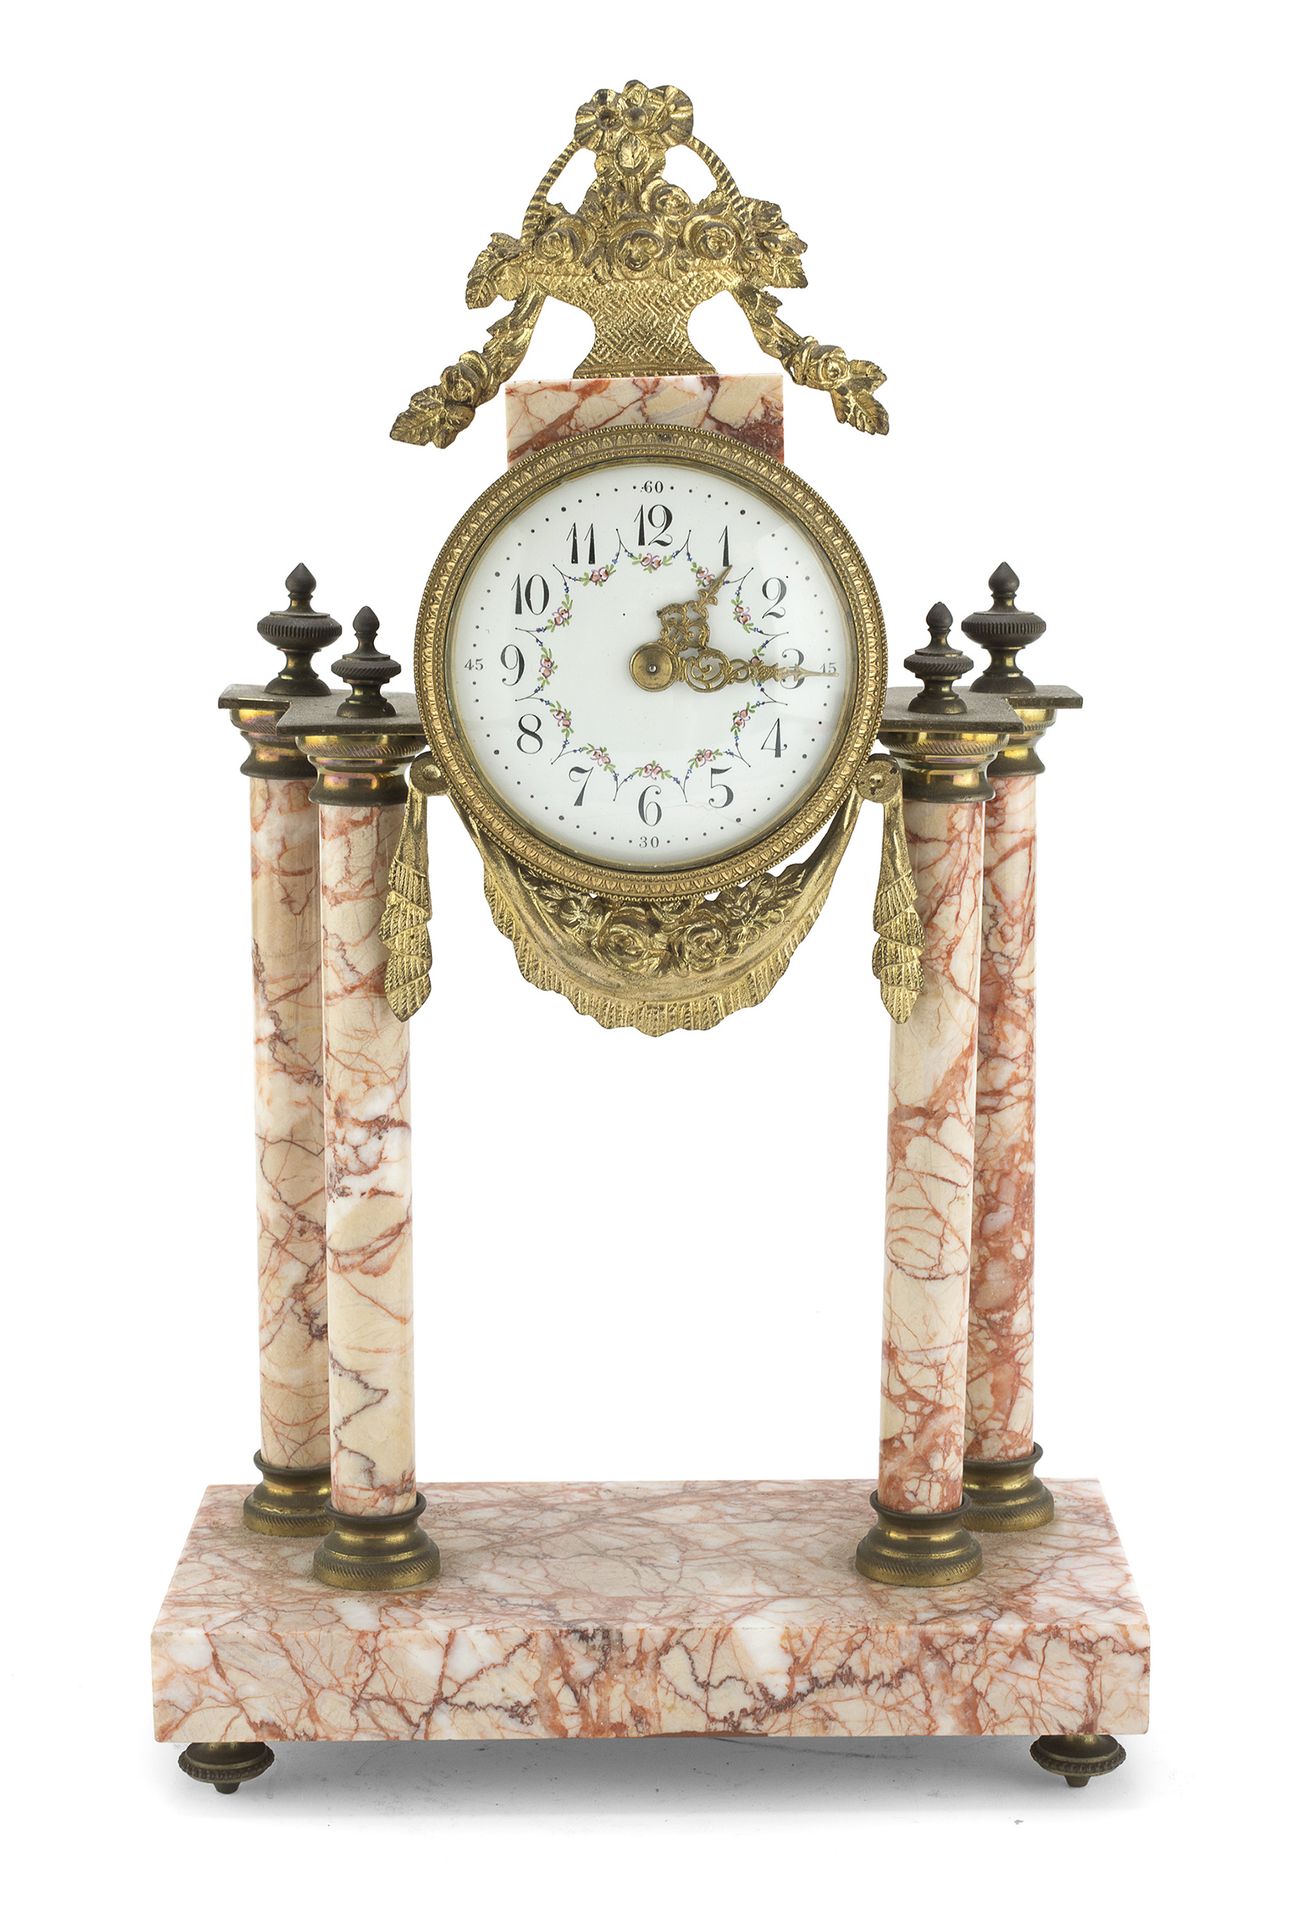 Null TABLE CLOCK IN PINK VERONA MARBLE, LATE 19th CENTURY